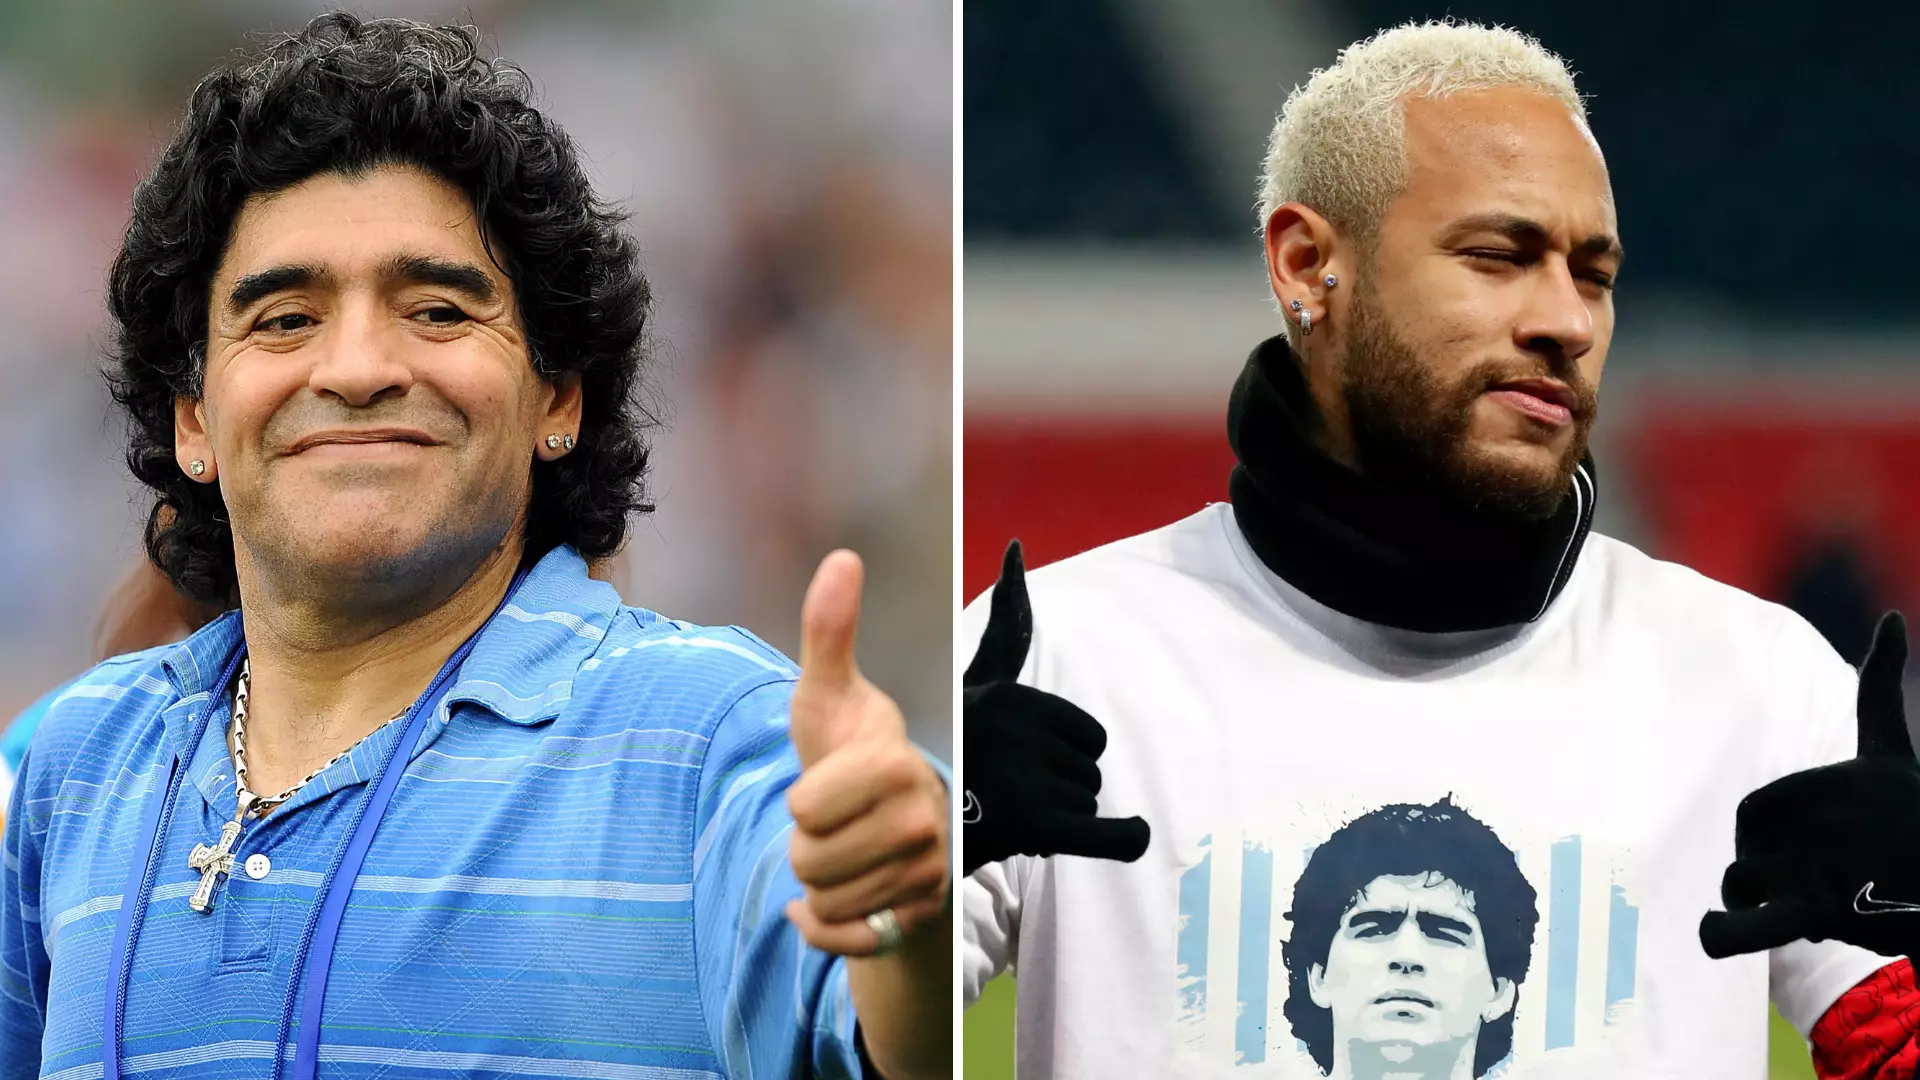 Neymar Shares Incredible Gesture Made By Diego Maradona When Meeting Him As A Teenager